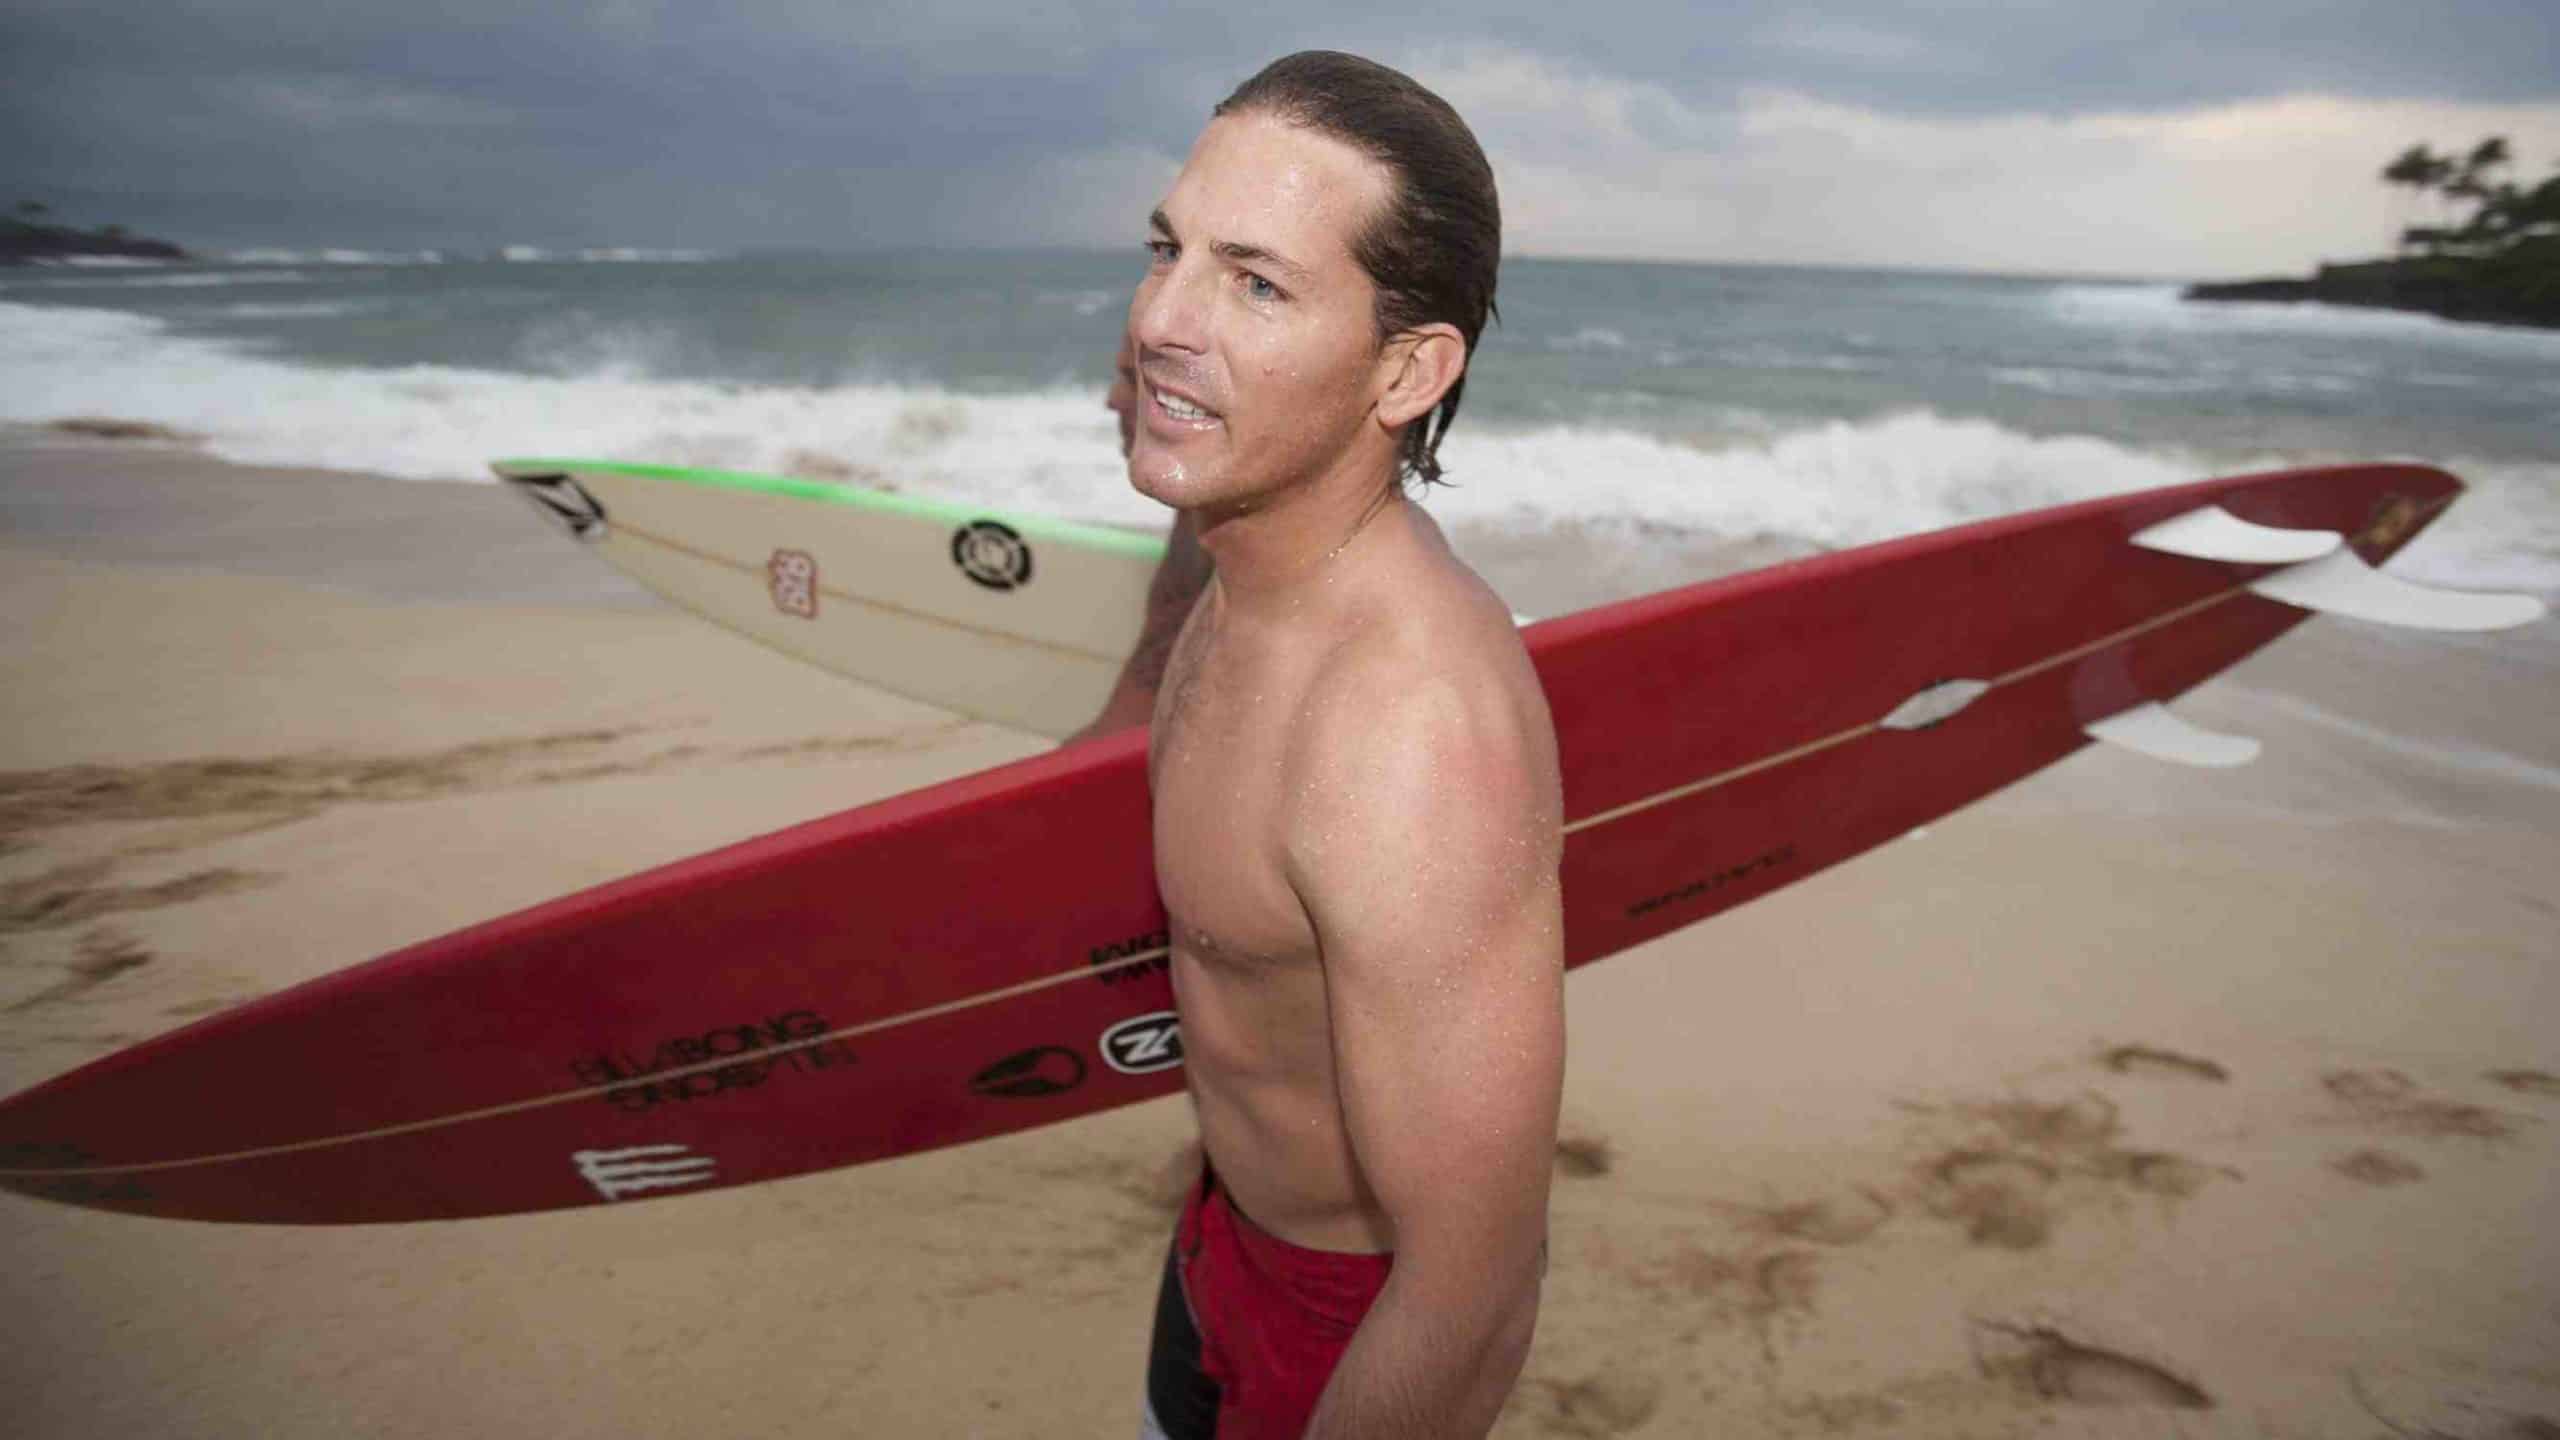 How many brothers did Andy Irons have?